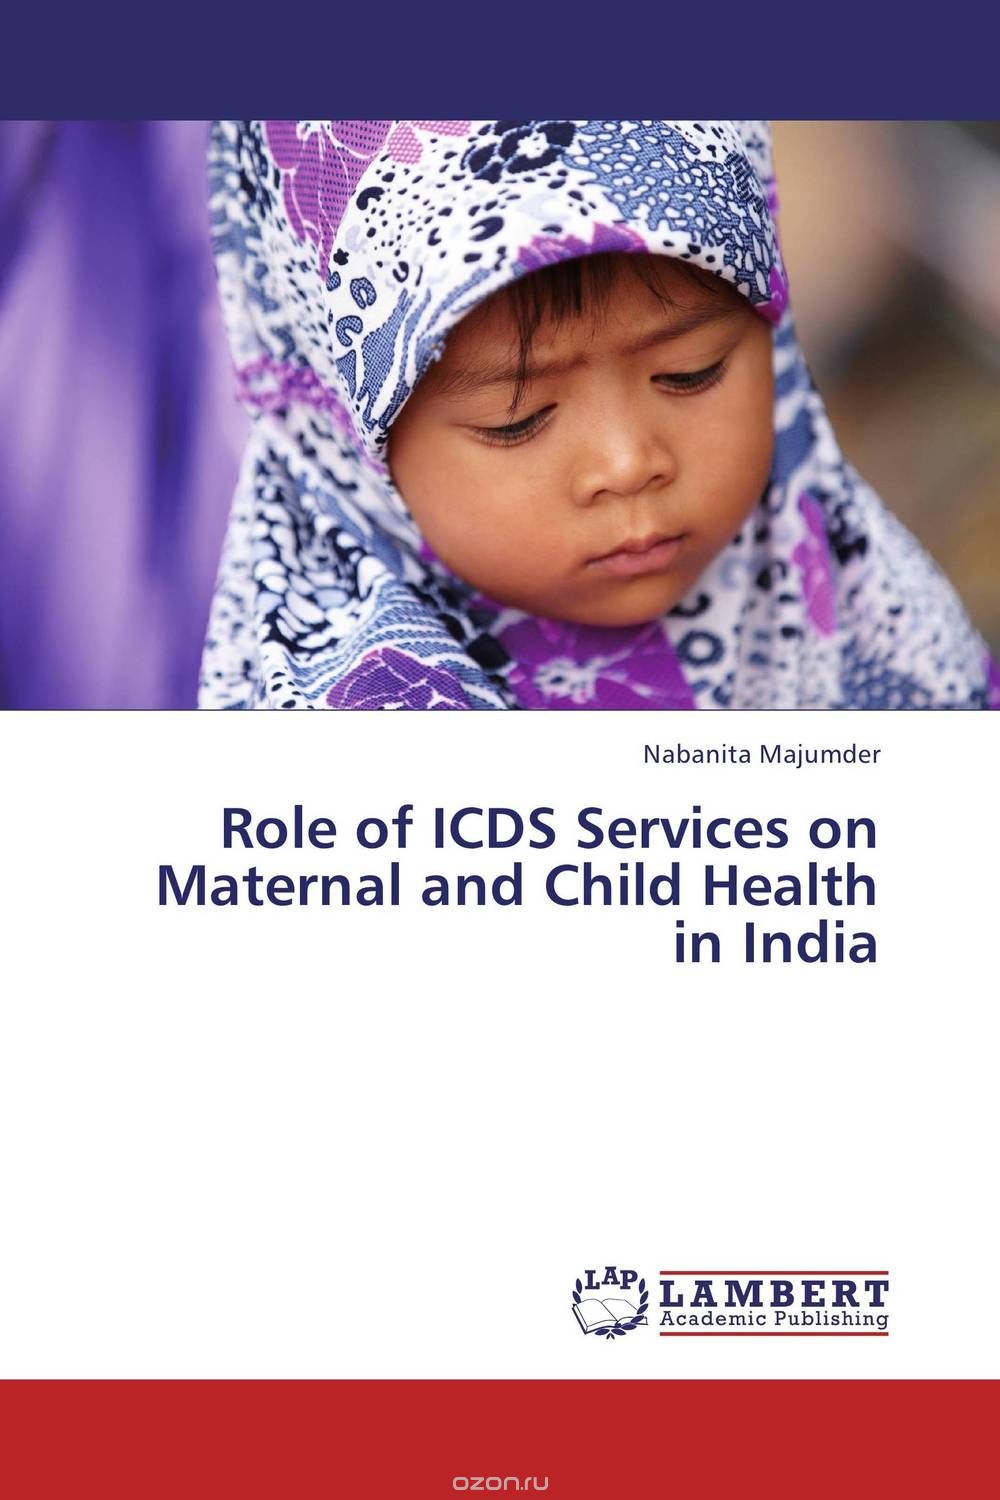 Скачать книгу "Role of ICDS Services on Maternal and Child Health in India"